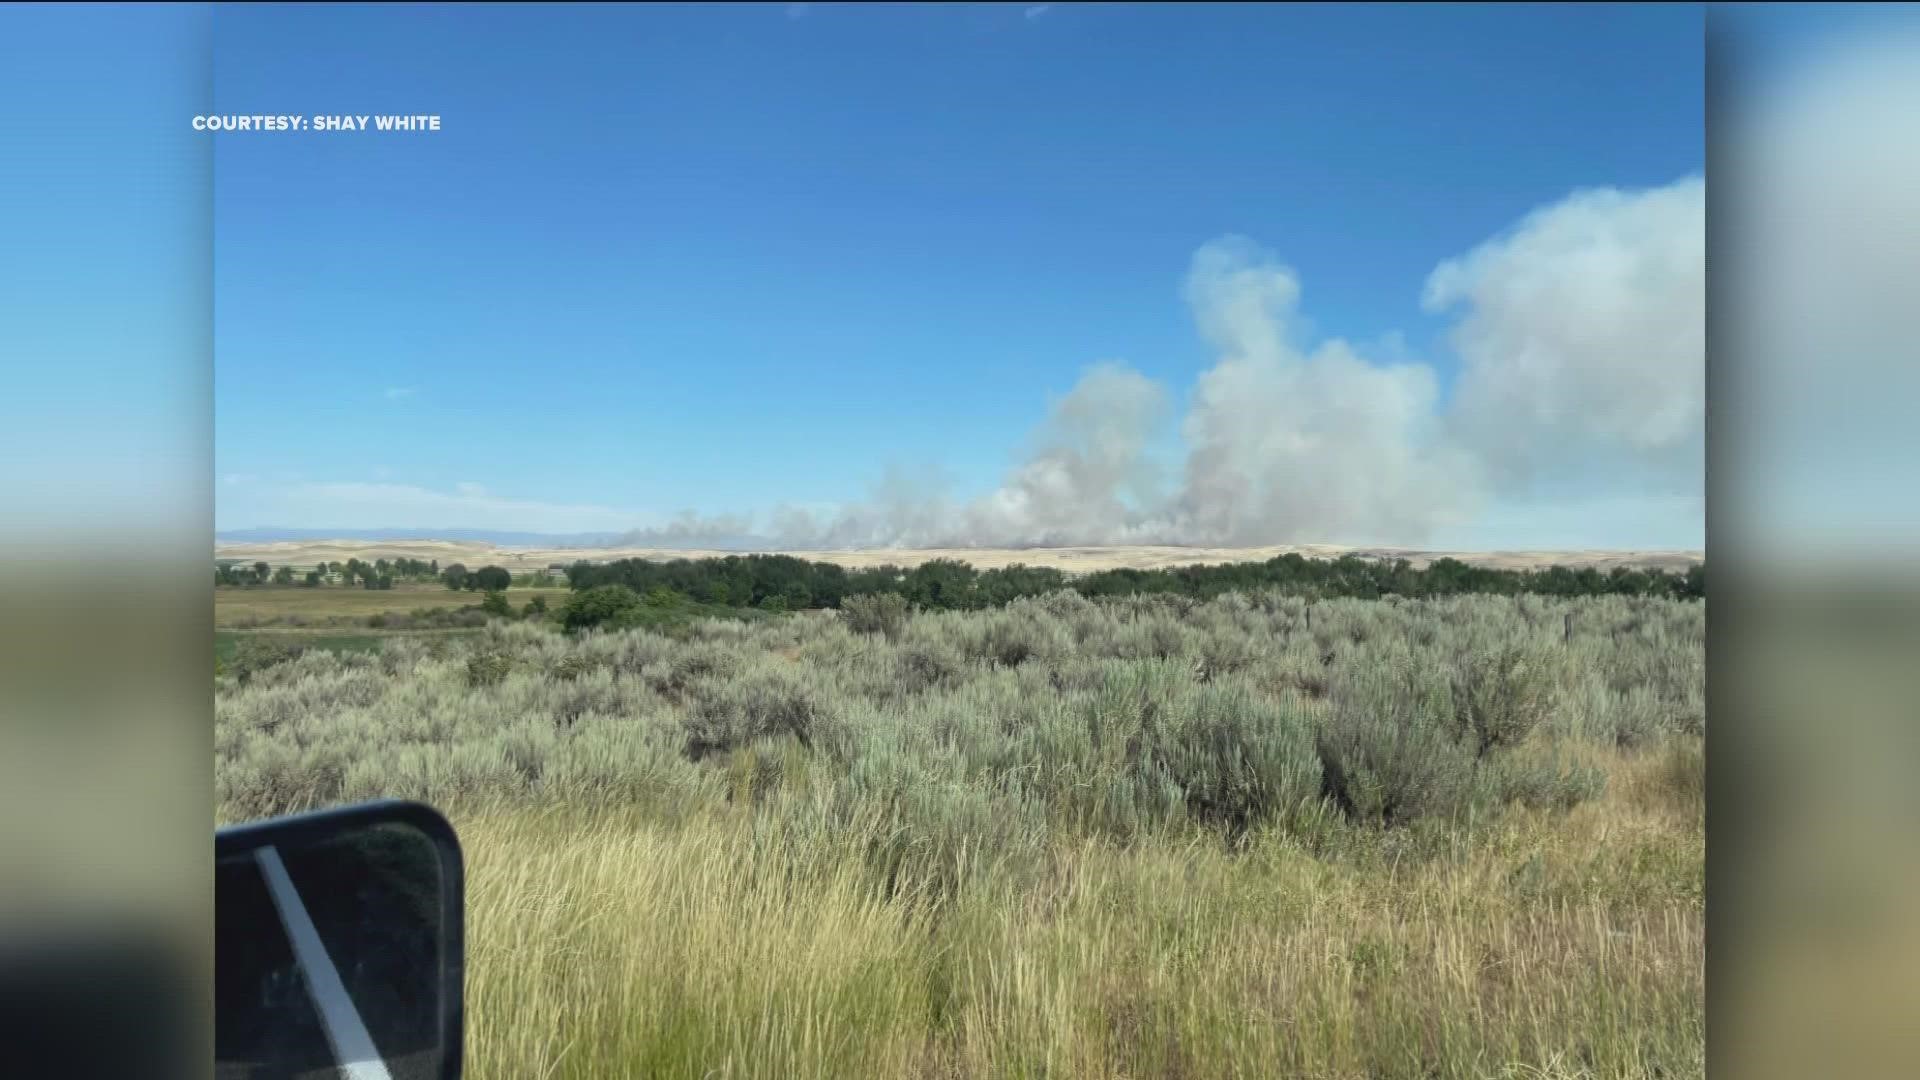 The Favre Fire is located east of Midvale and around 6 miles north of Crane Creek Reservoir. The fire is estimated at 1,500 acres.